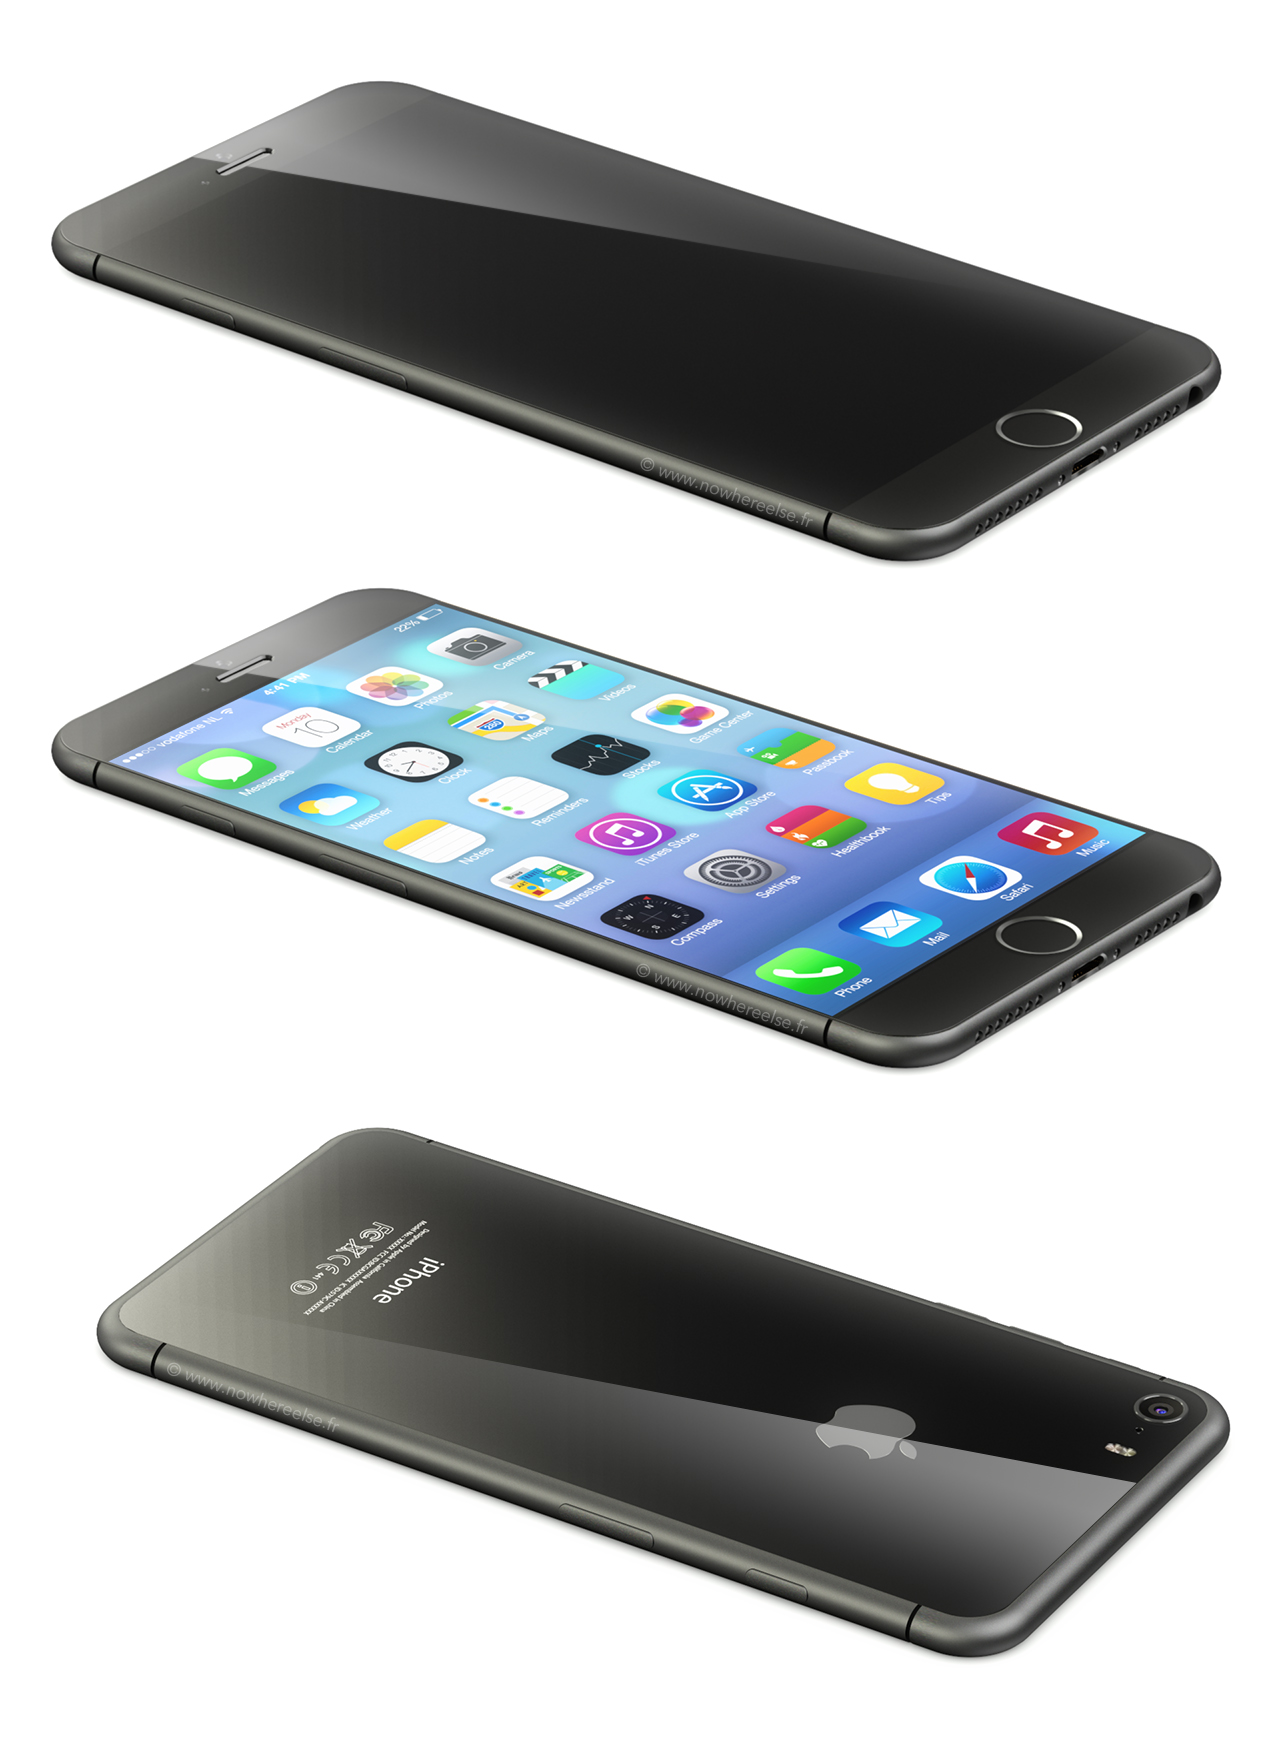 iPhone 6 Concept Nowhereelse - iPhone 6: concept based on leaked patterns